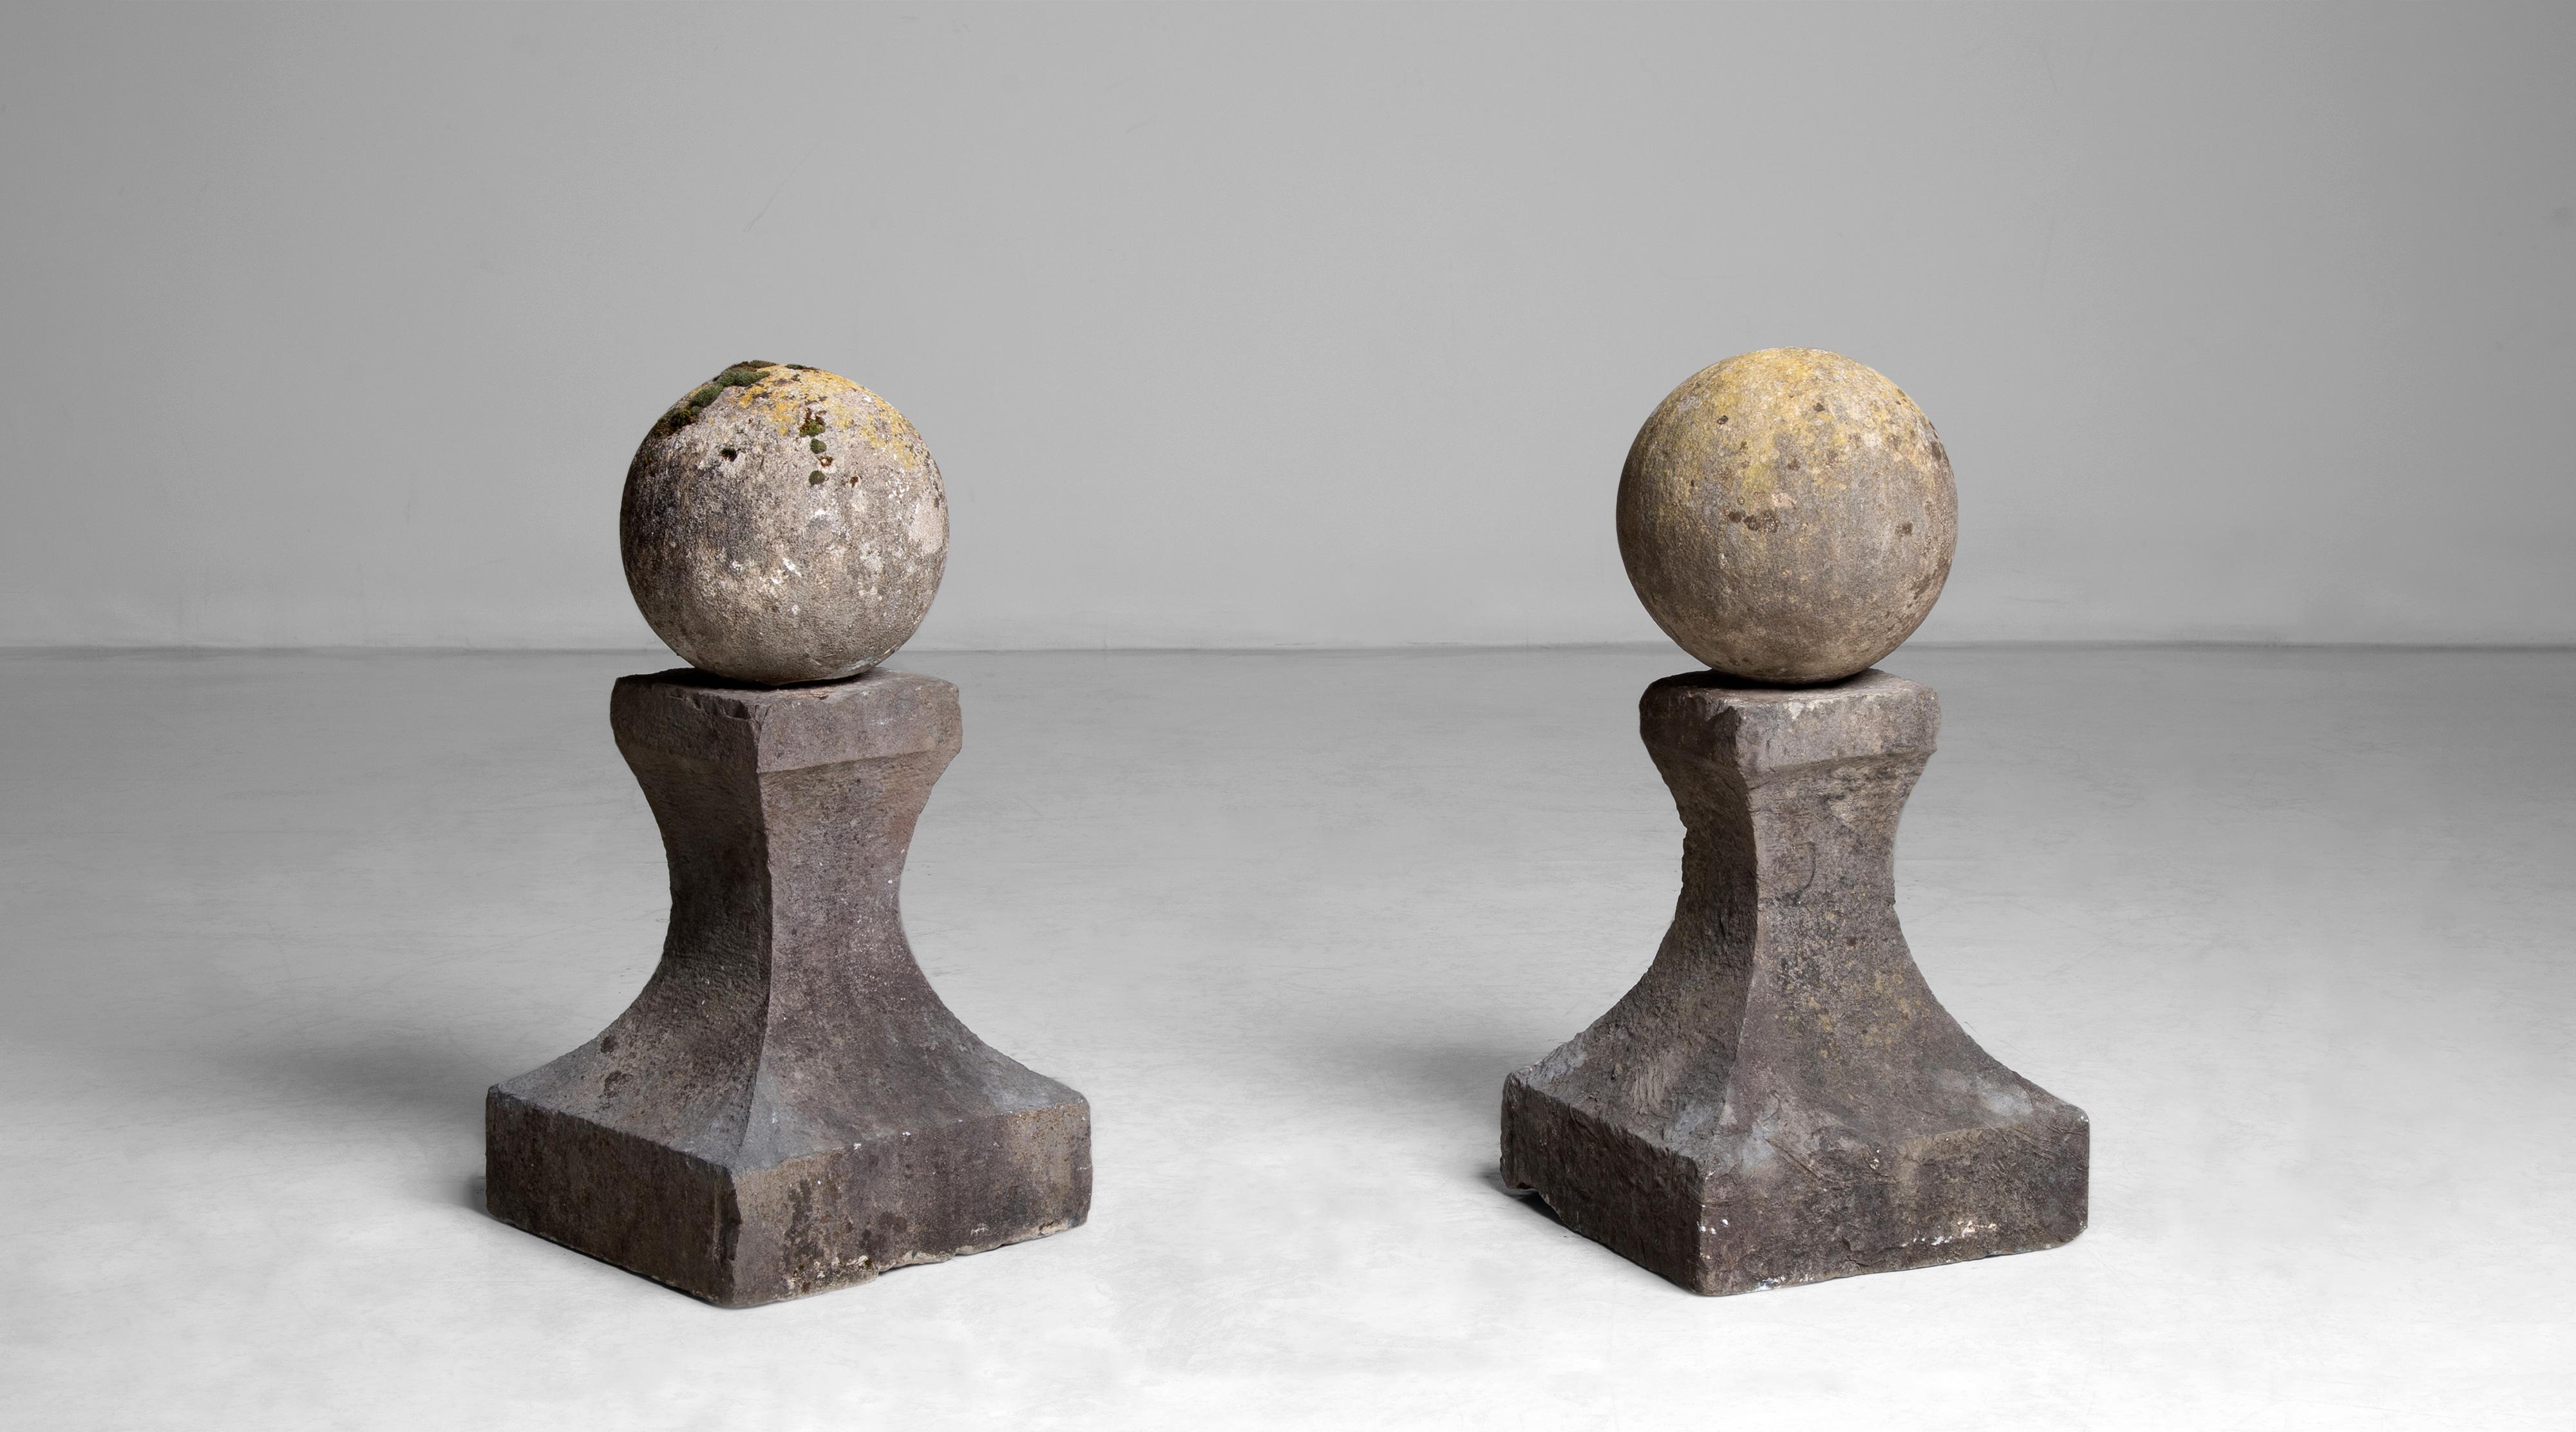 Pair of garden elements.
France circa 1890.
Cast stone spheres on tapered plinth.
Measures: 13”L x 13” D x 26.5” H.
 